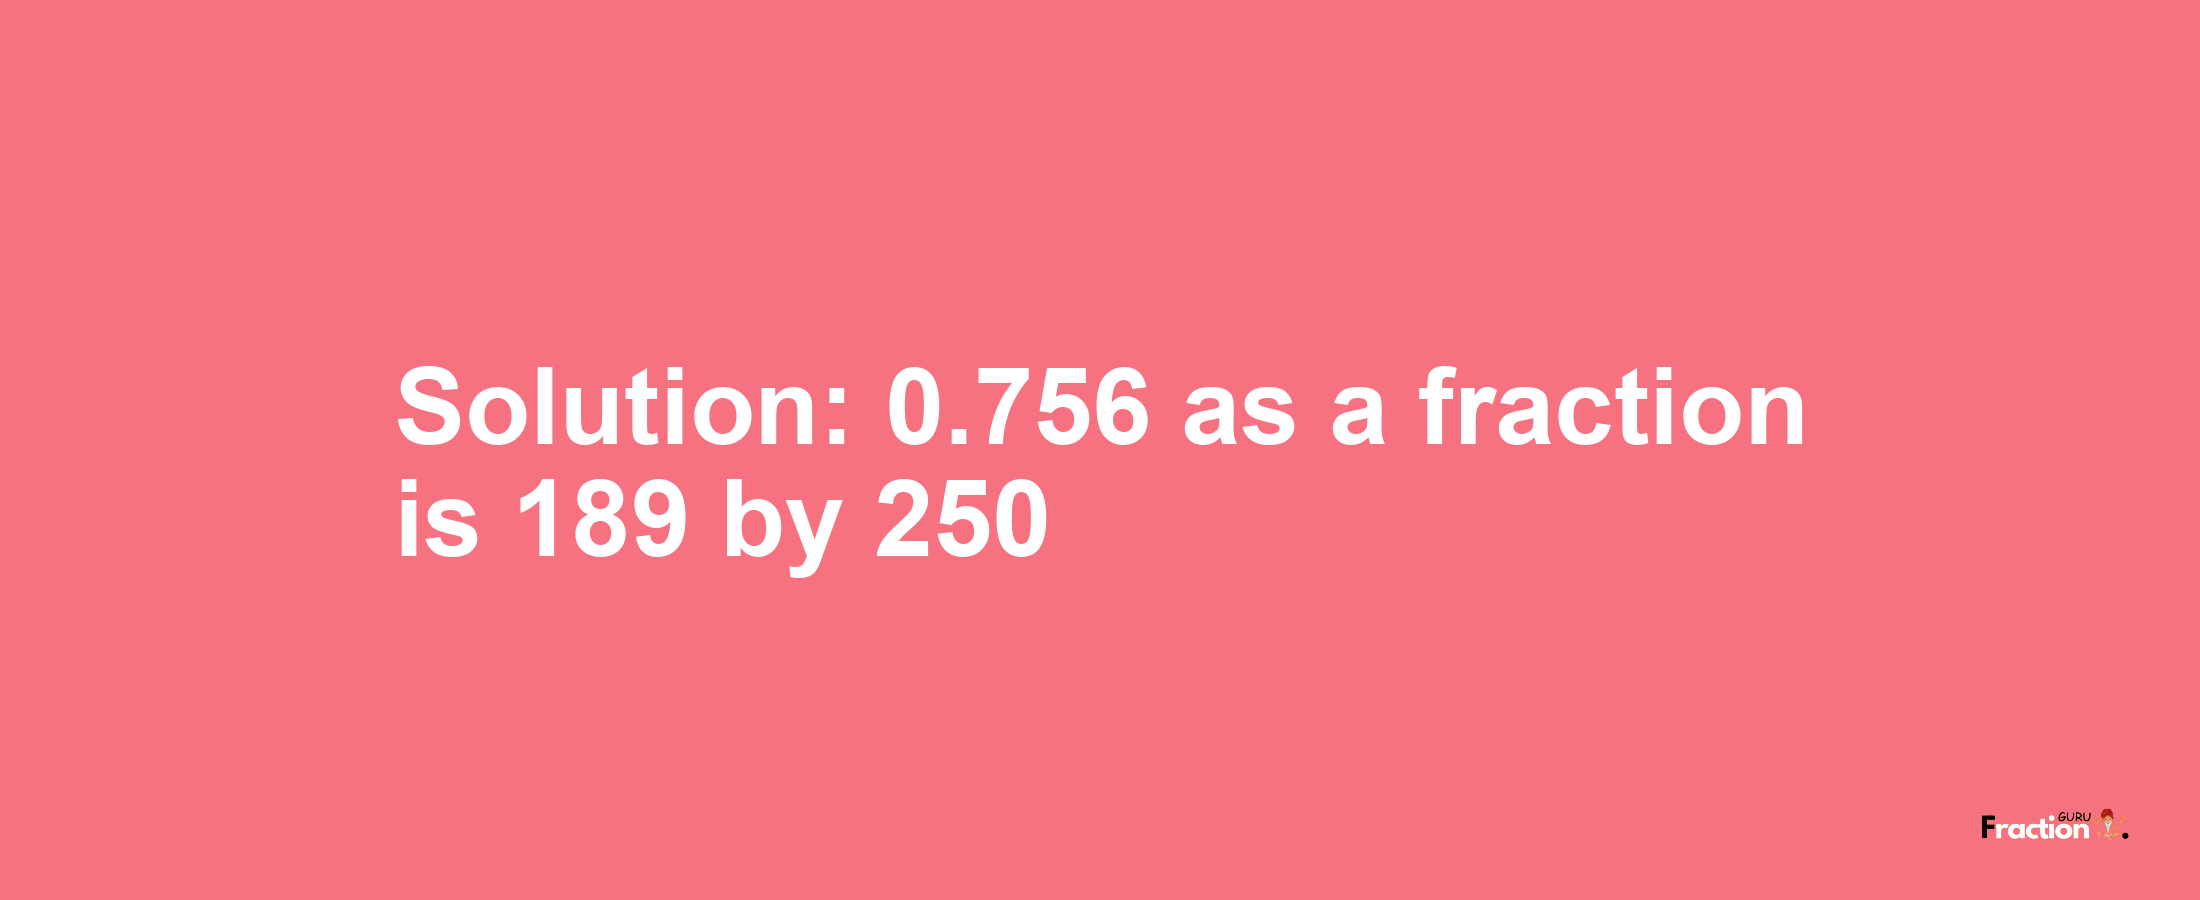 Solution:0.756 as a fraction is 189/250